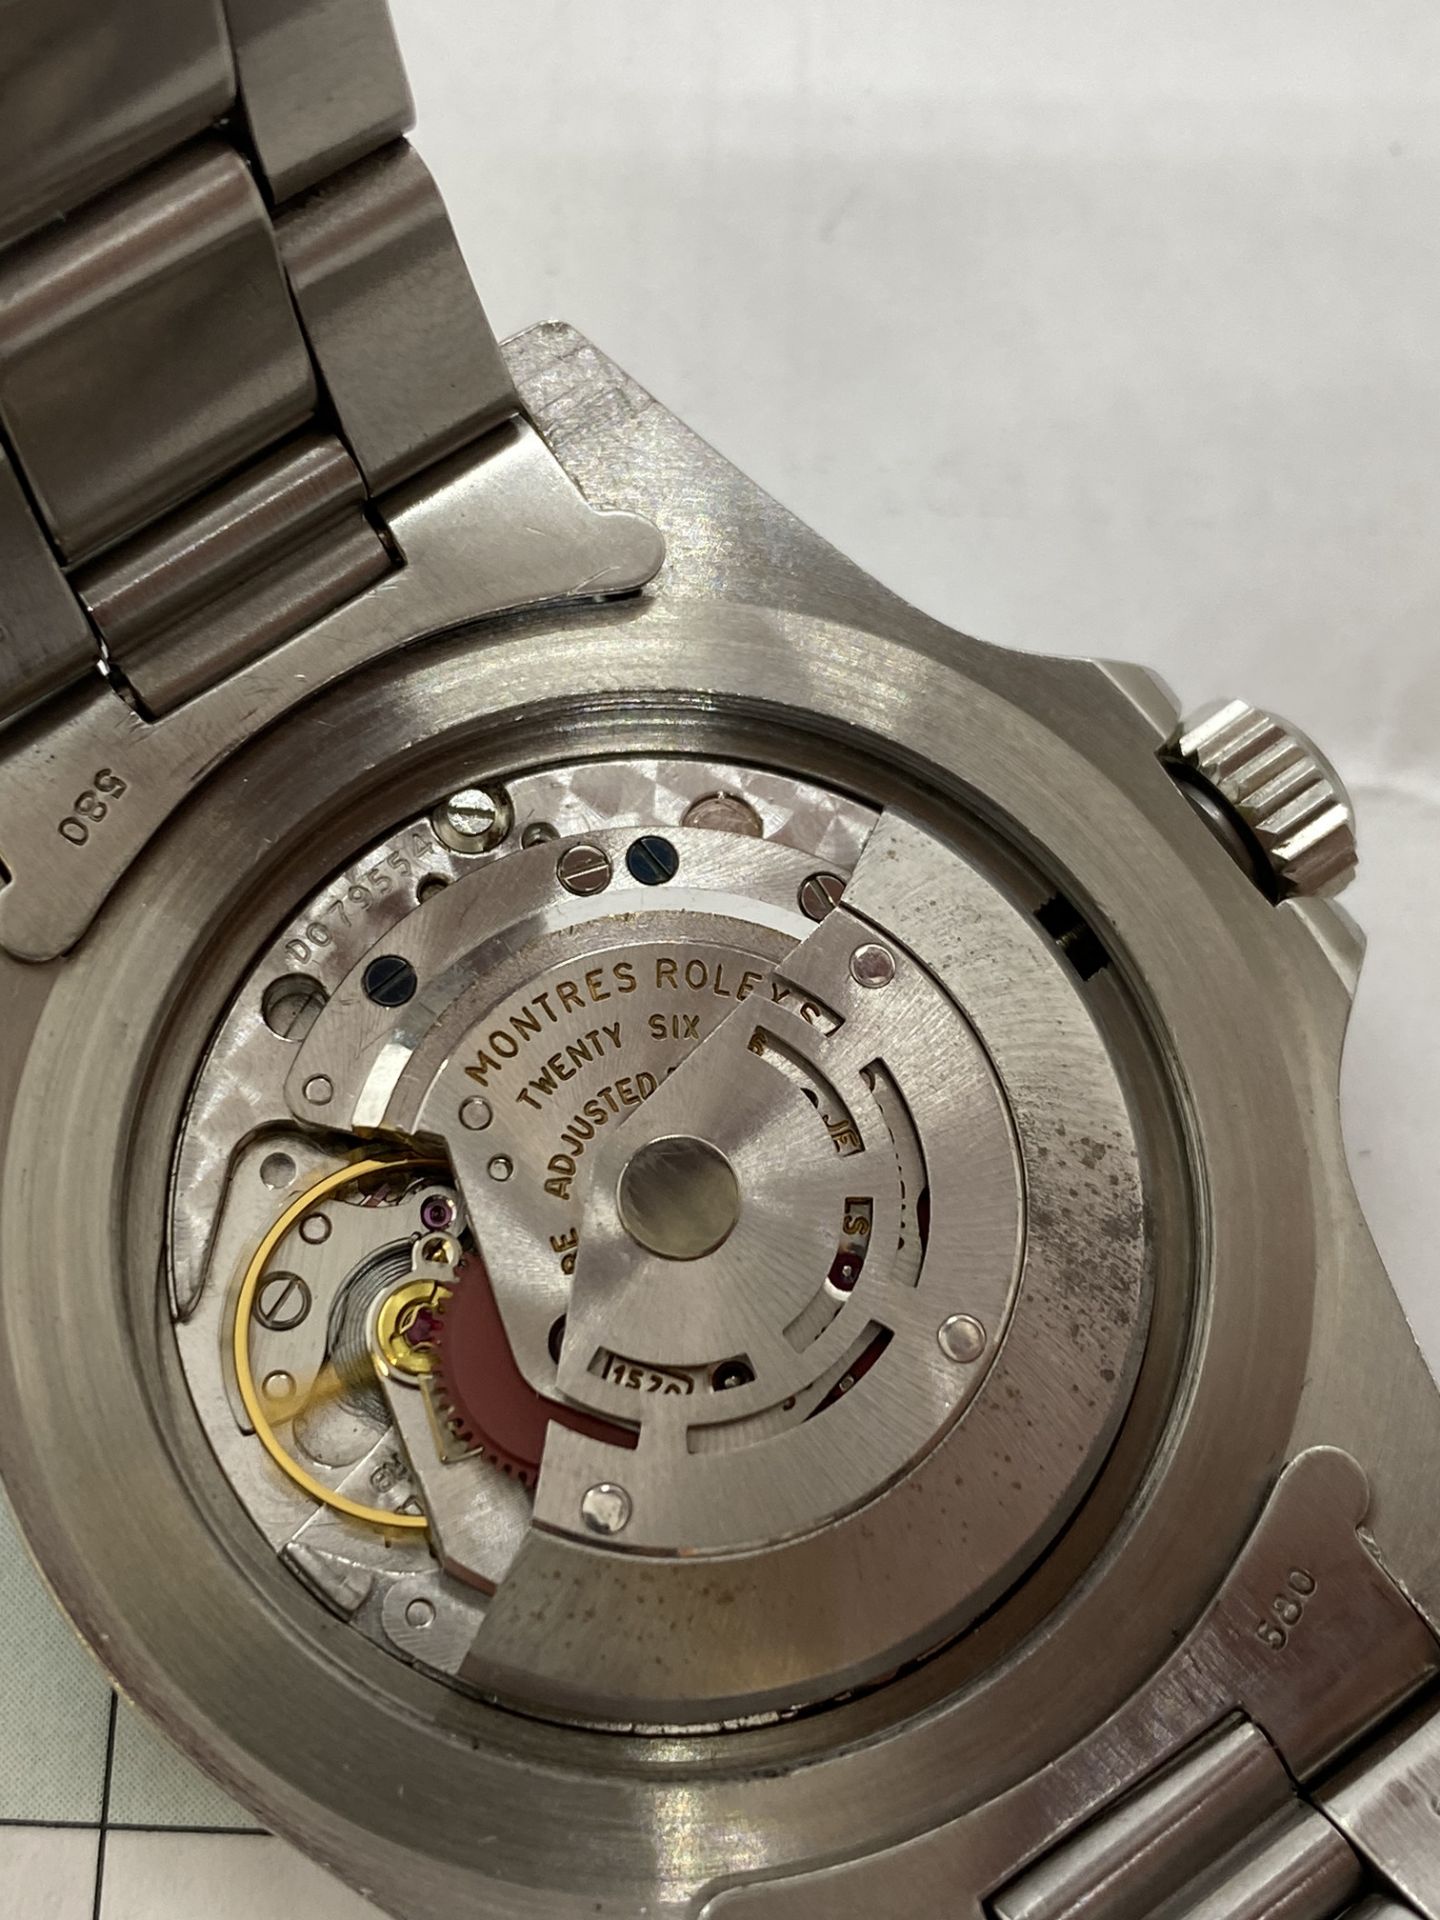 WATCH MARKED ROLEX SUBMARINER - MOVEMENT WARRANTED AS ROLEX - Image 18 of 28